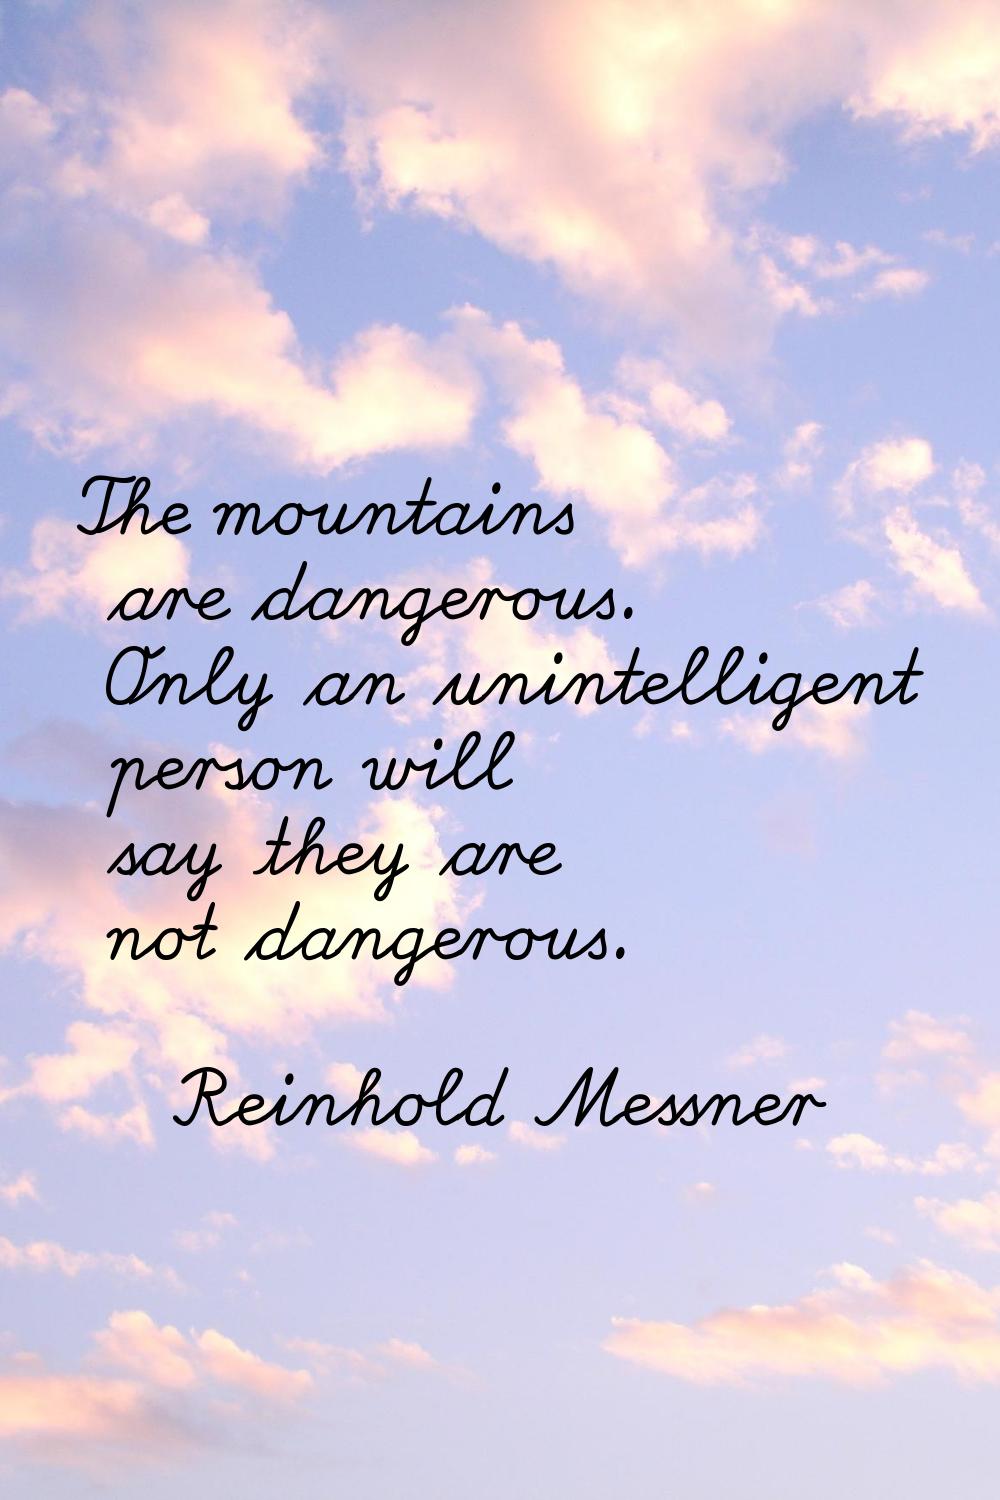 The mountains are dangerous. Only an unintelligent person will say they are not dangerous.